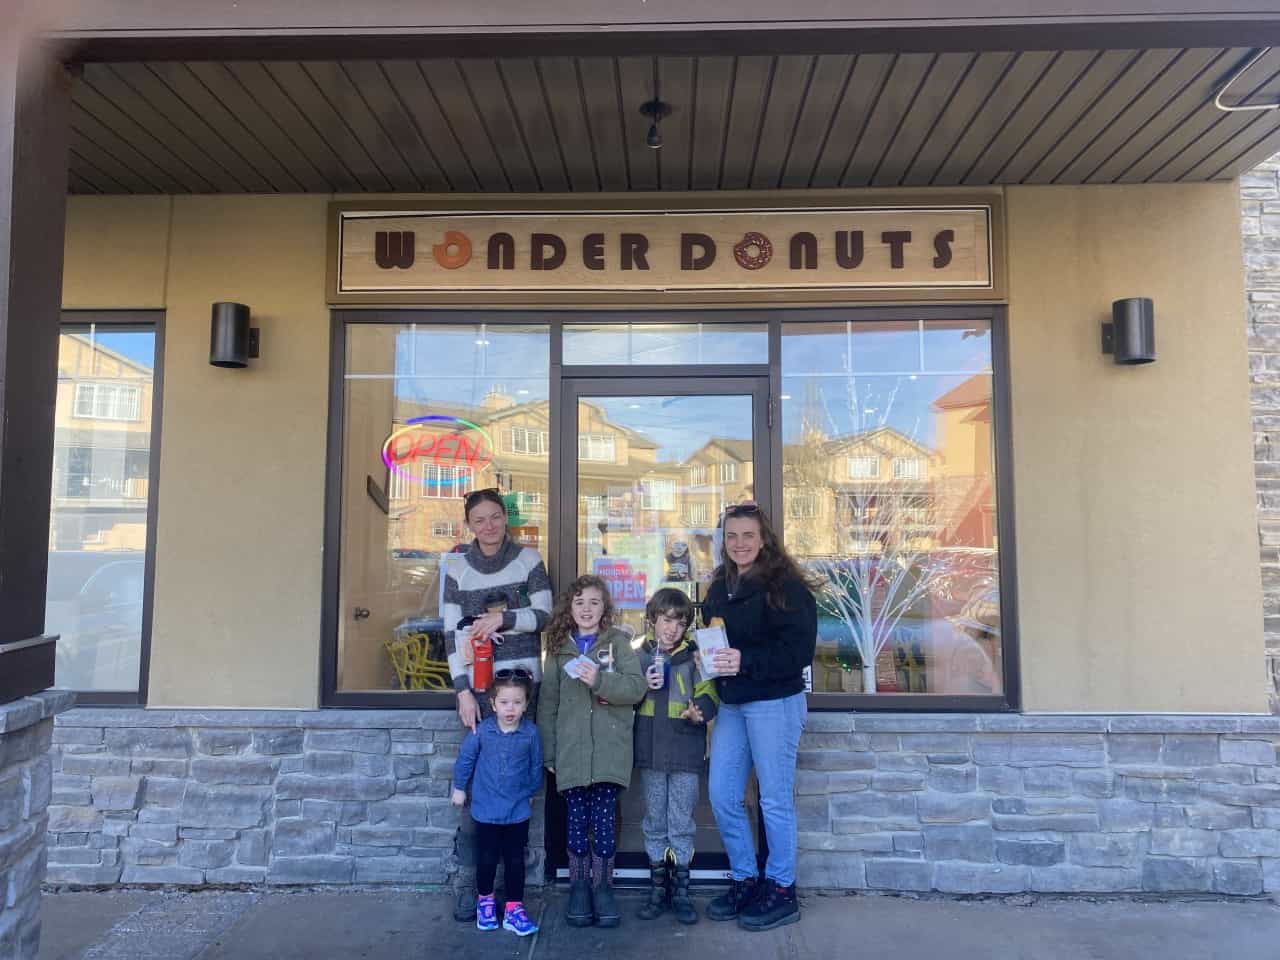 Adventure Seekers Meet at Wonder Donuts Calgary Alberta Canada - Eh Canada Adventure Seekers, Andrea Horning and Jesseca Perry meeting up with little seekers at the best donut shop in Calgary, Wonder Donuts. Shout out to Andrea for sharing this local business is her neighborhood. 